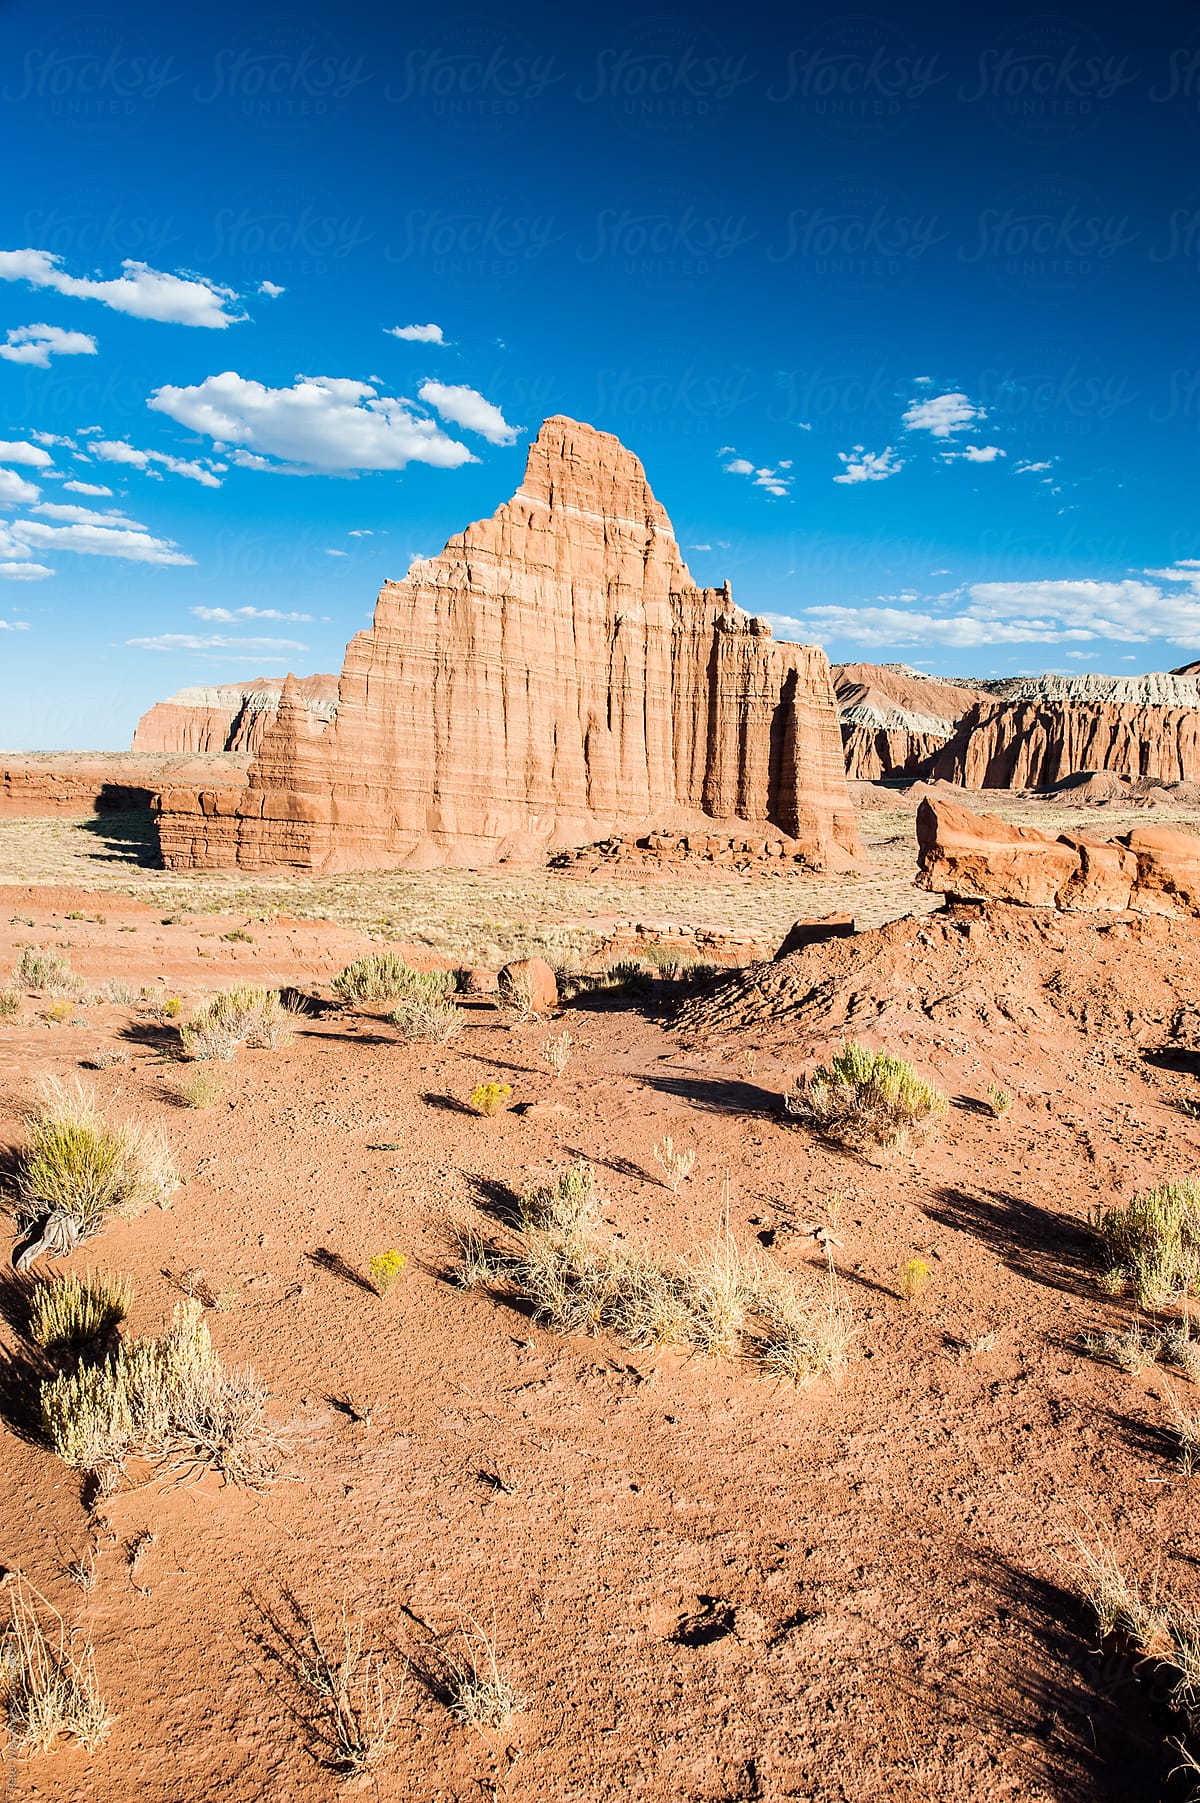 Capitol Reef National Park: Temple of the sun in Cathedral Valley